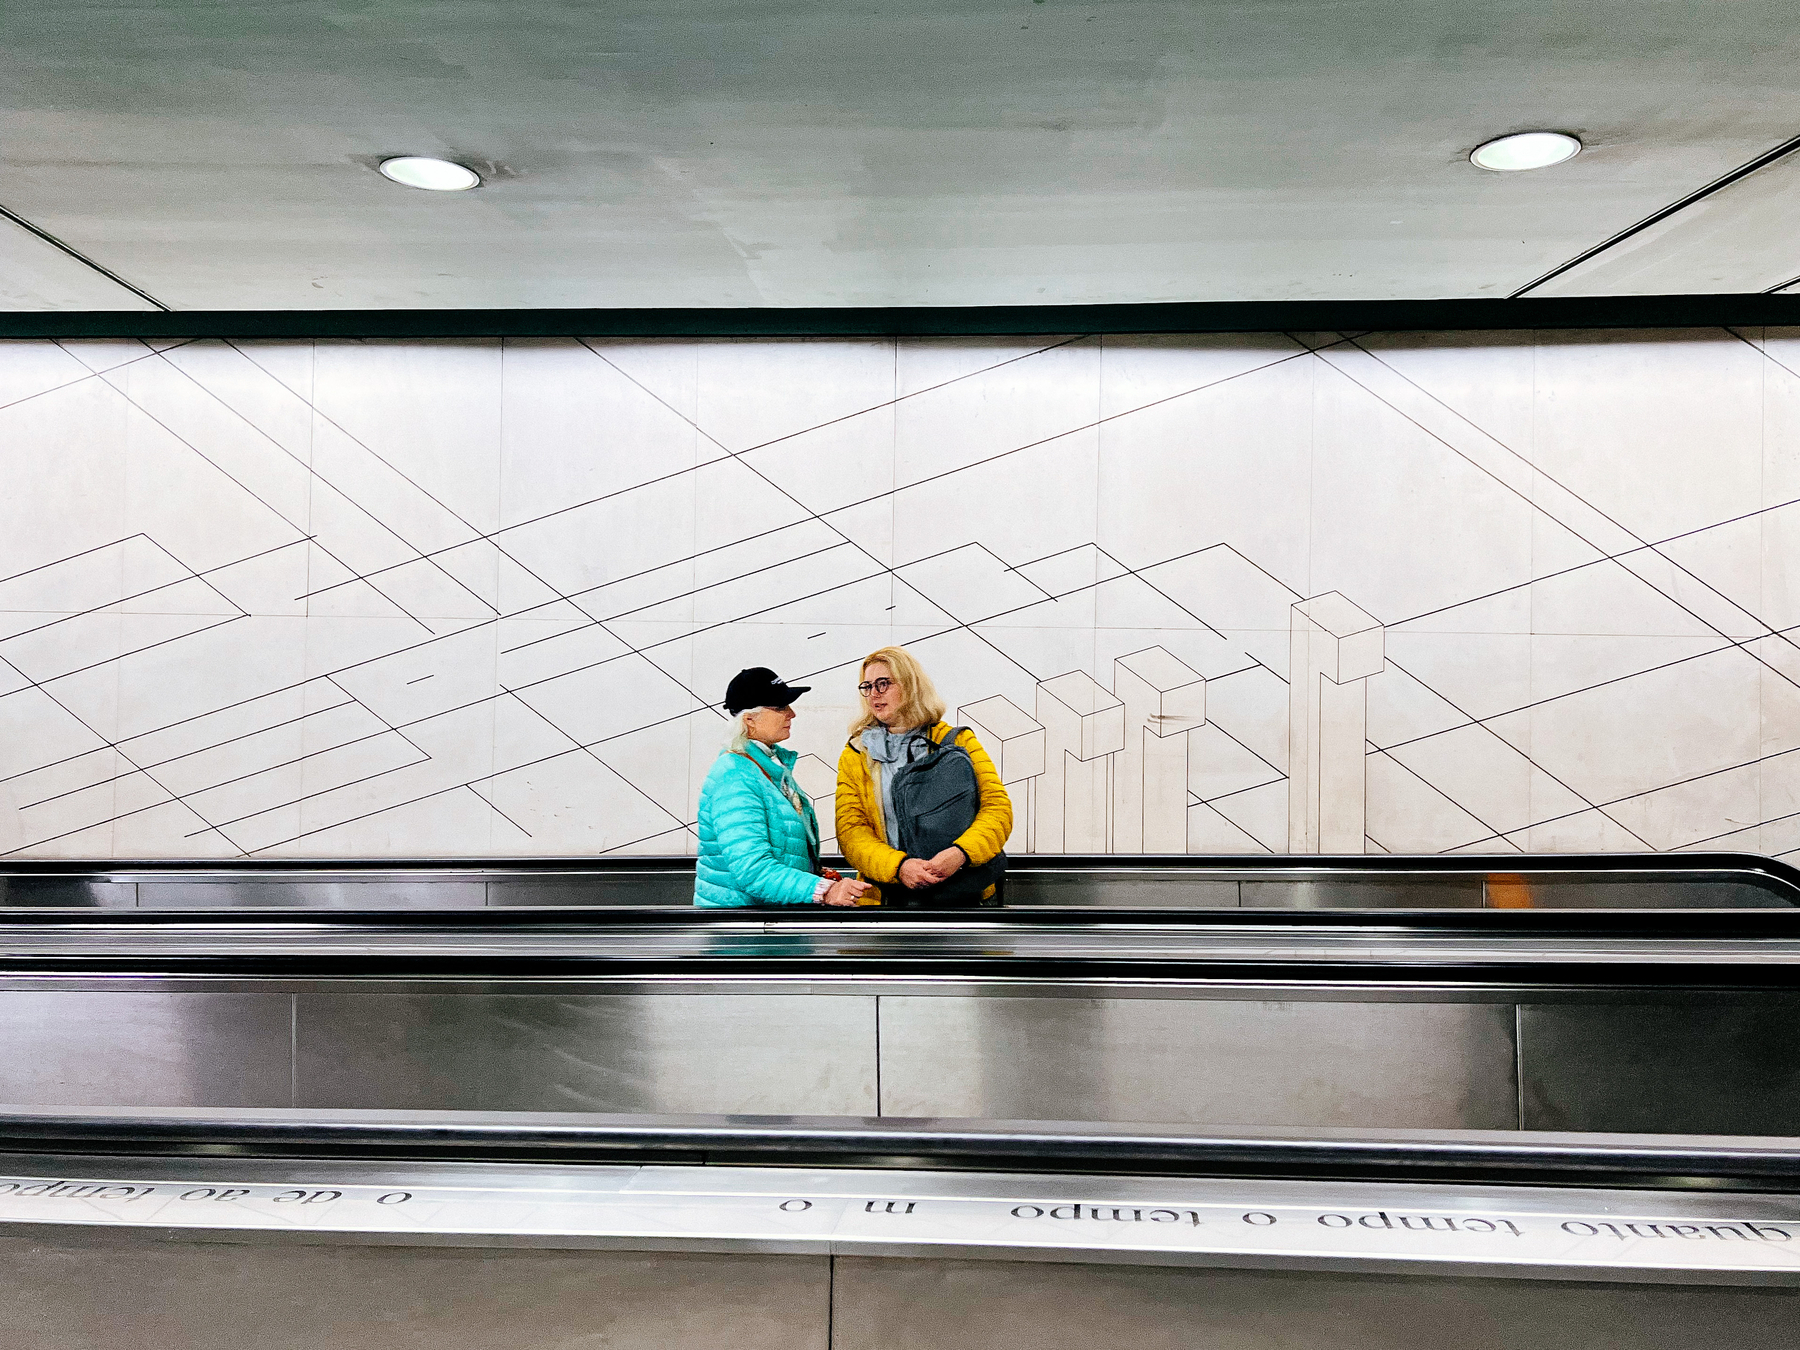 Two women ride an escalator. One in bright yellow jacket, the other light blue. 